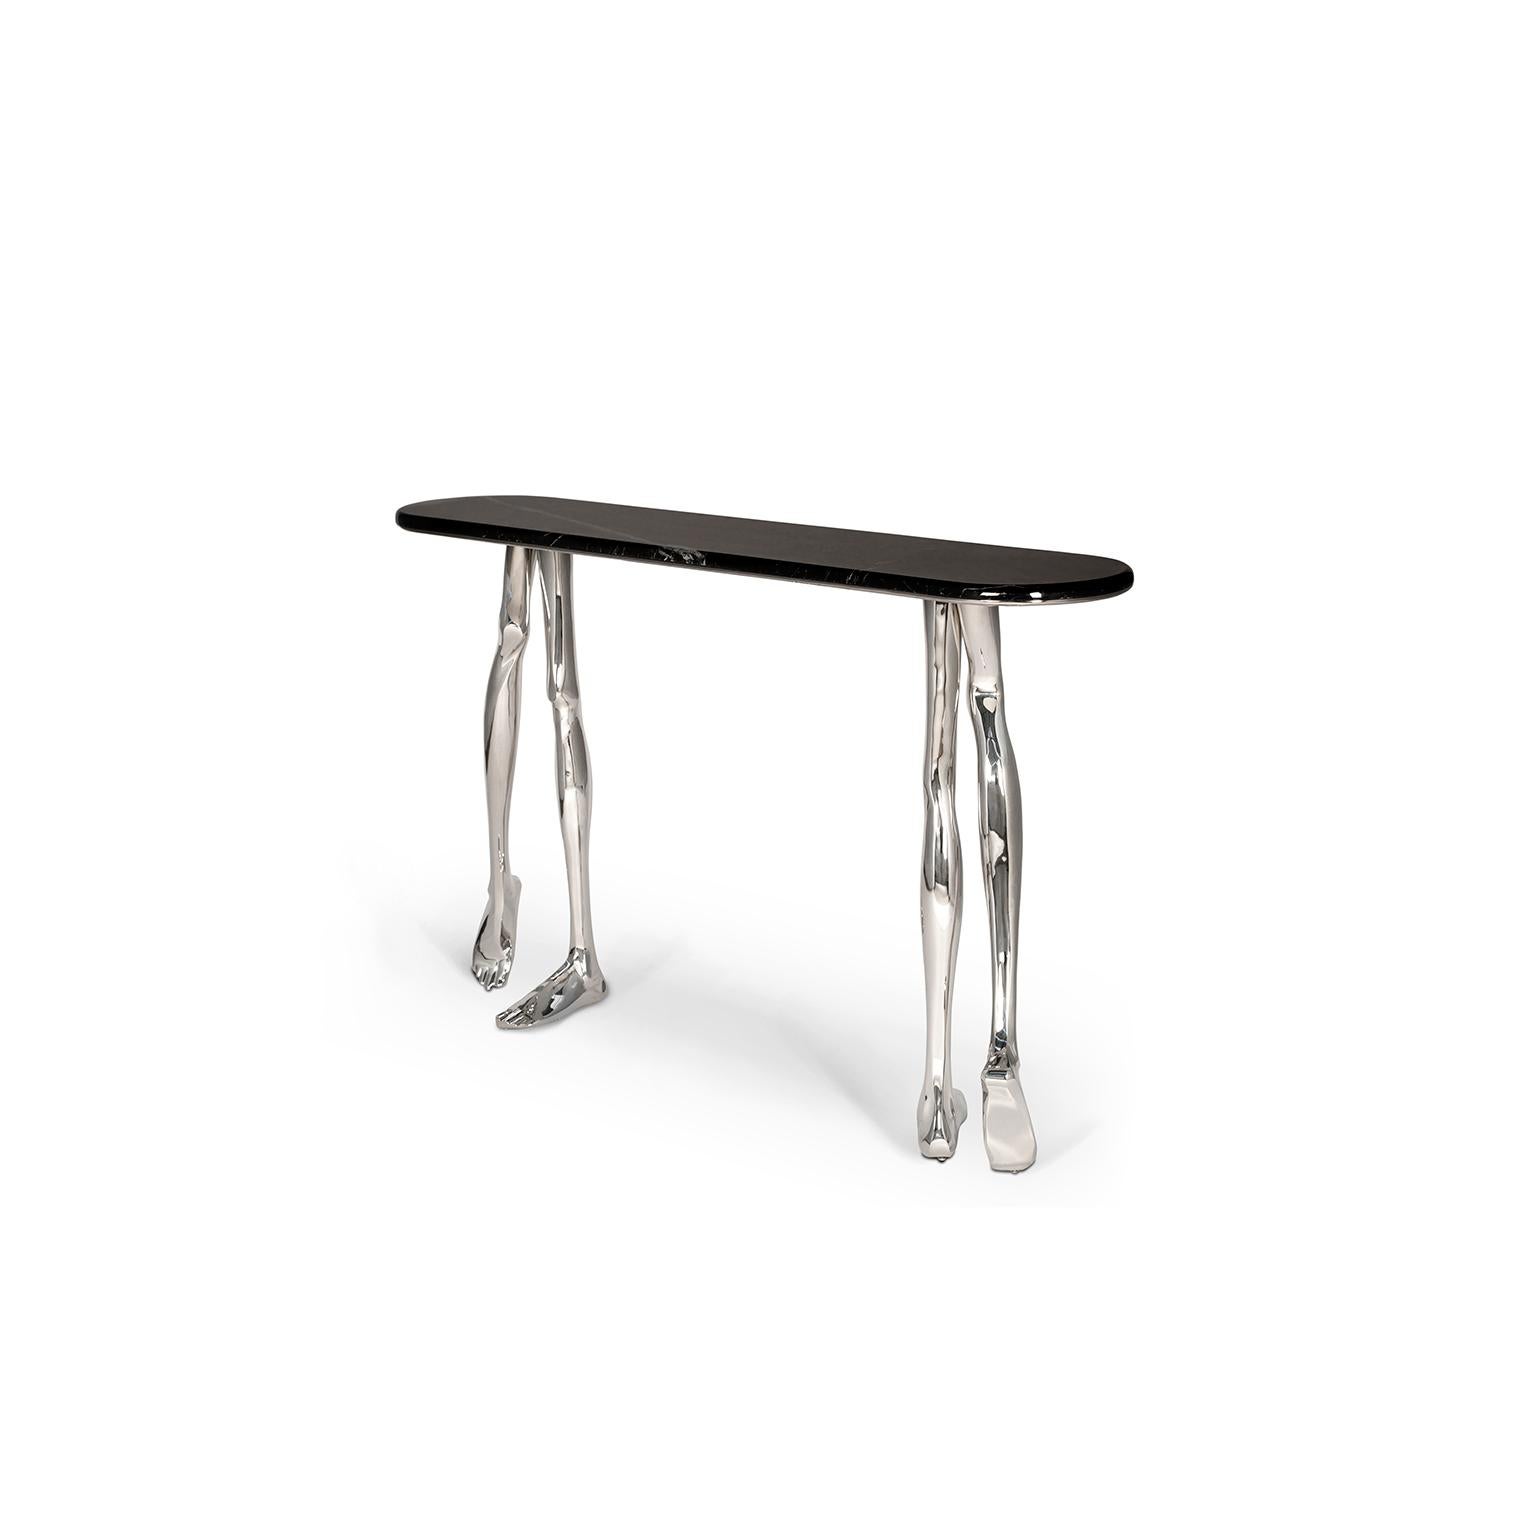 Portuguese Modern Monroe Silver Art Console Table, Nickel Brass and Black Marble Top For Sale